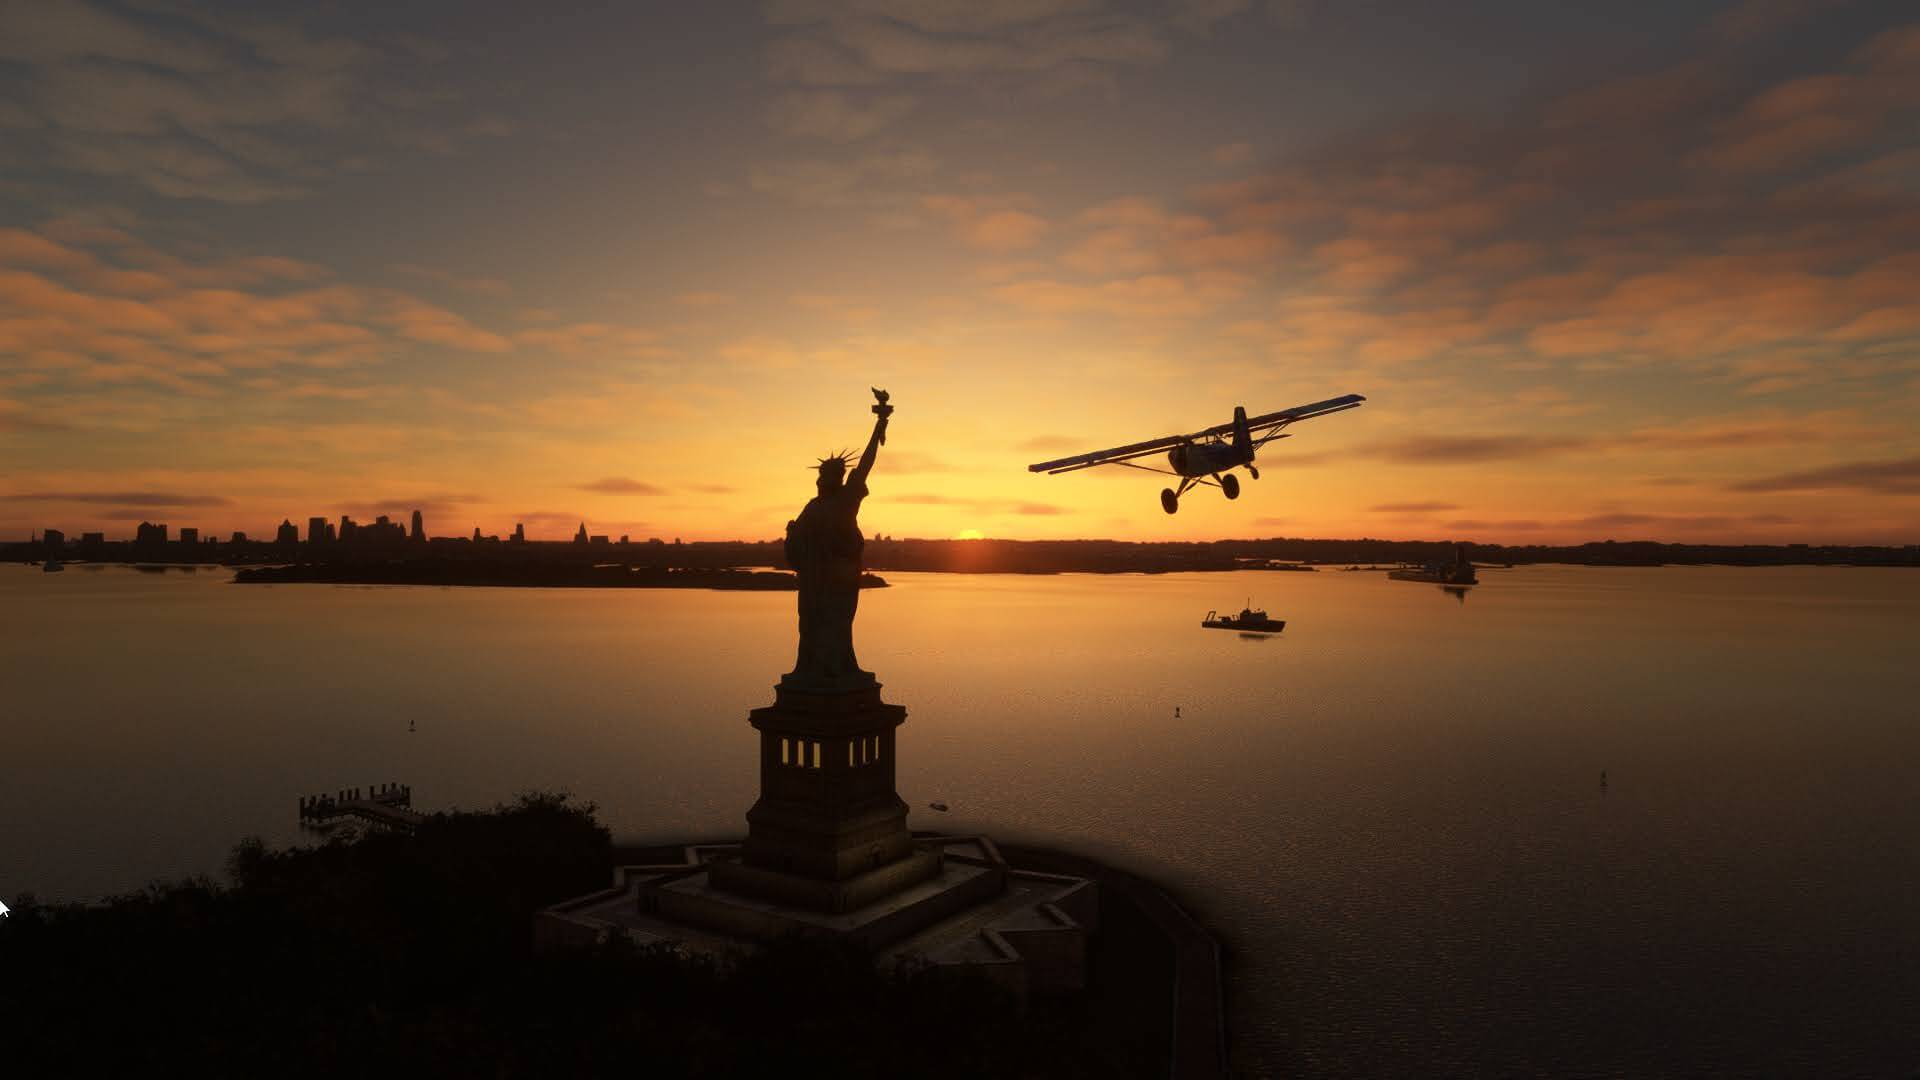 A General Aviation aircraft passes the Statue of Liberty